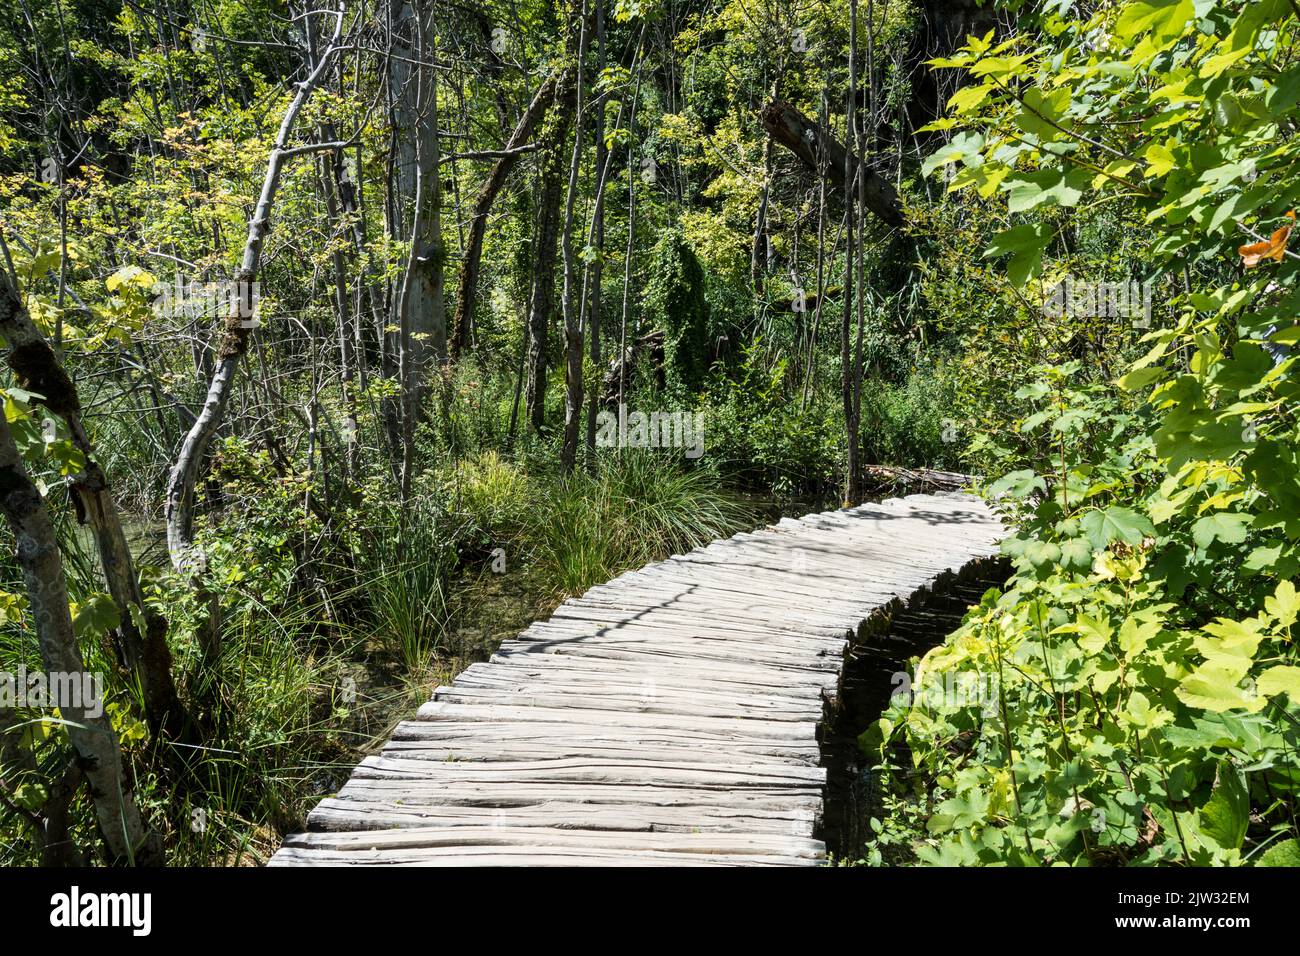 A boardwalk over marshy land in Plitvice Lakes National Park, Croatia, Europe. Stock Photo